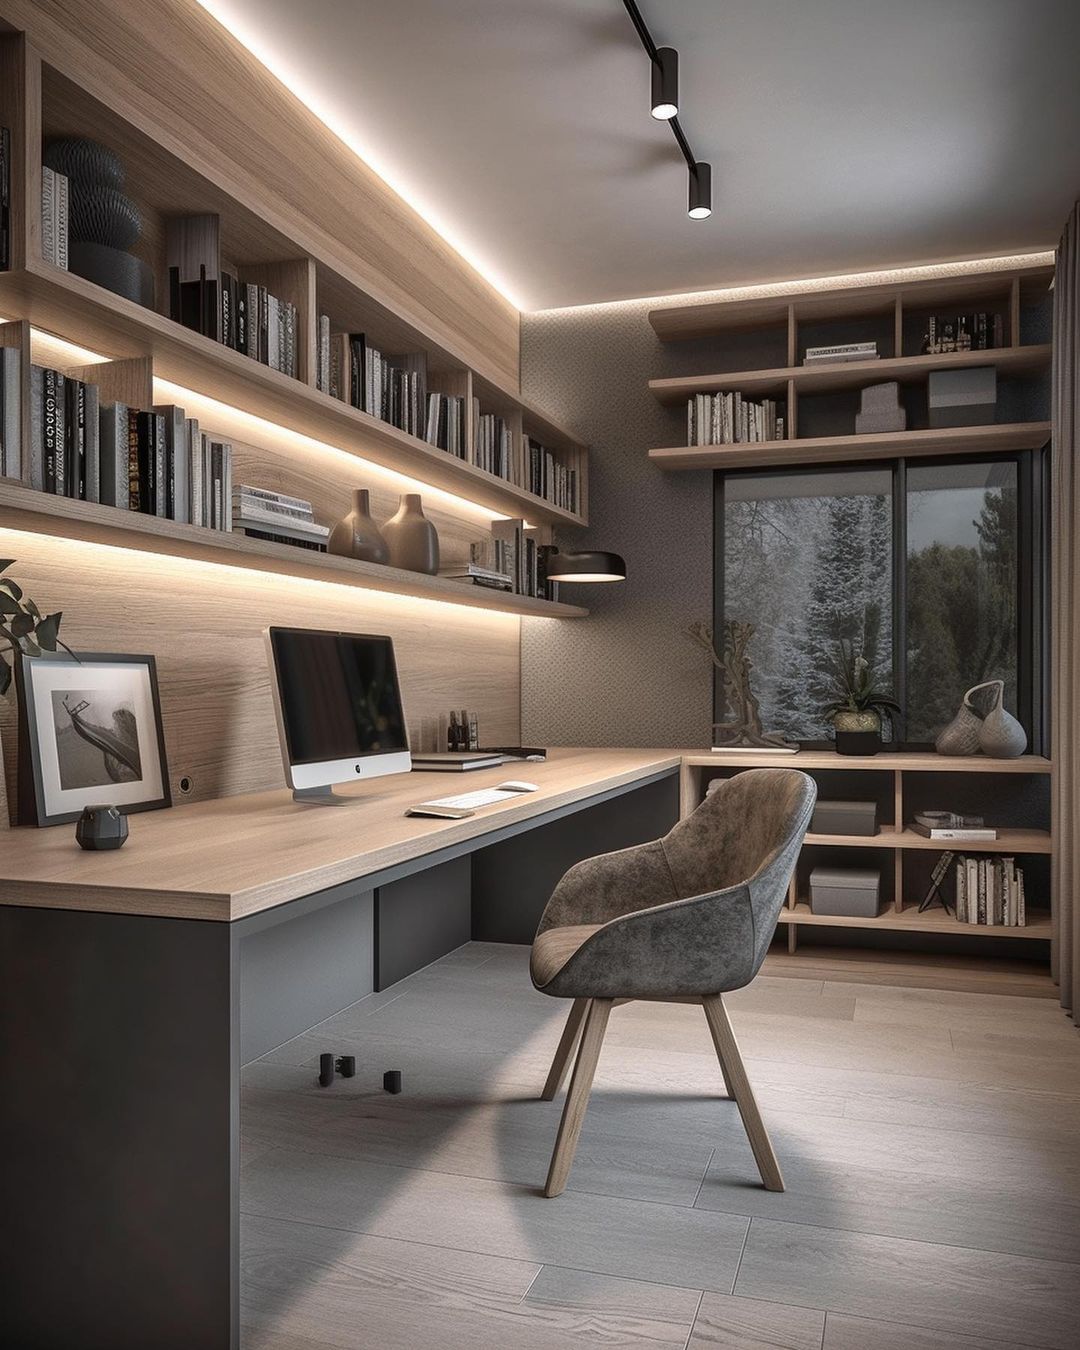 Creating a Homey Office Design